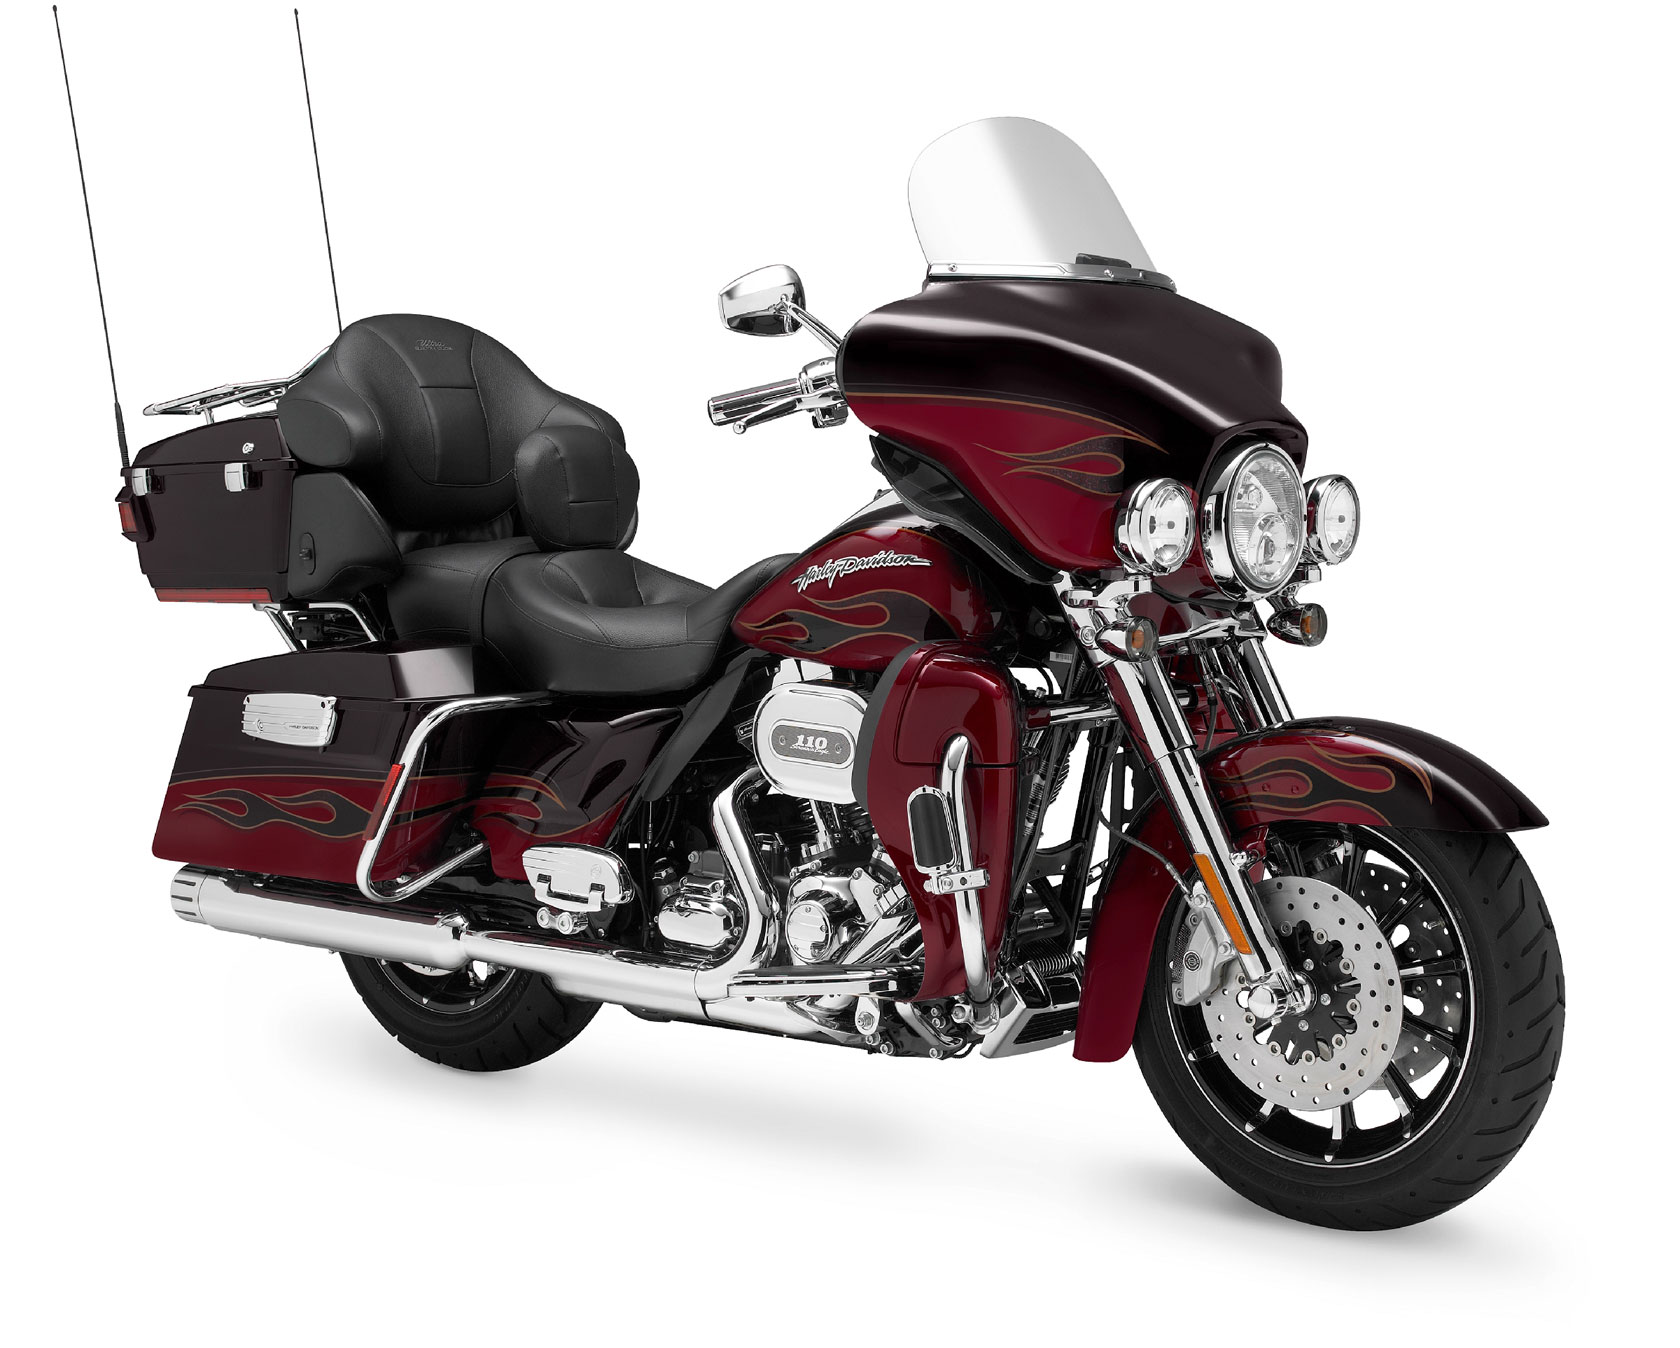 HARLEY DAVIDSON Firefighter Ultra Classic Electra Glide specs - 2010